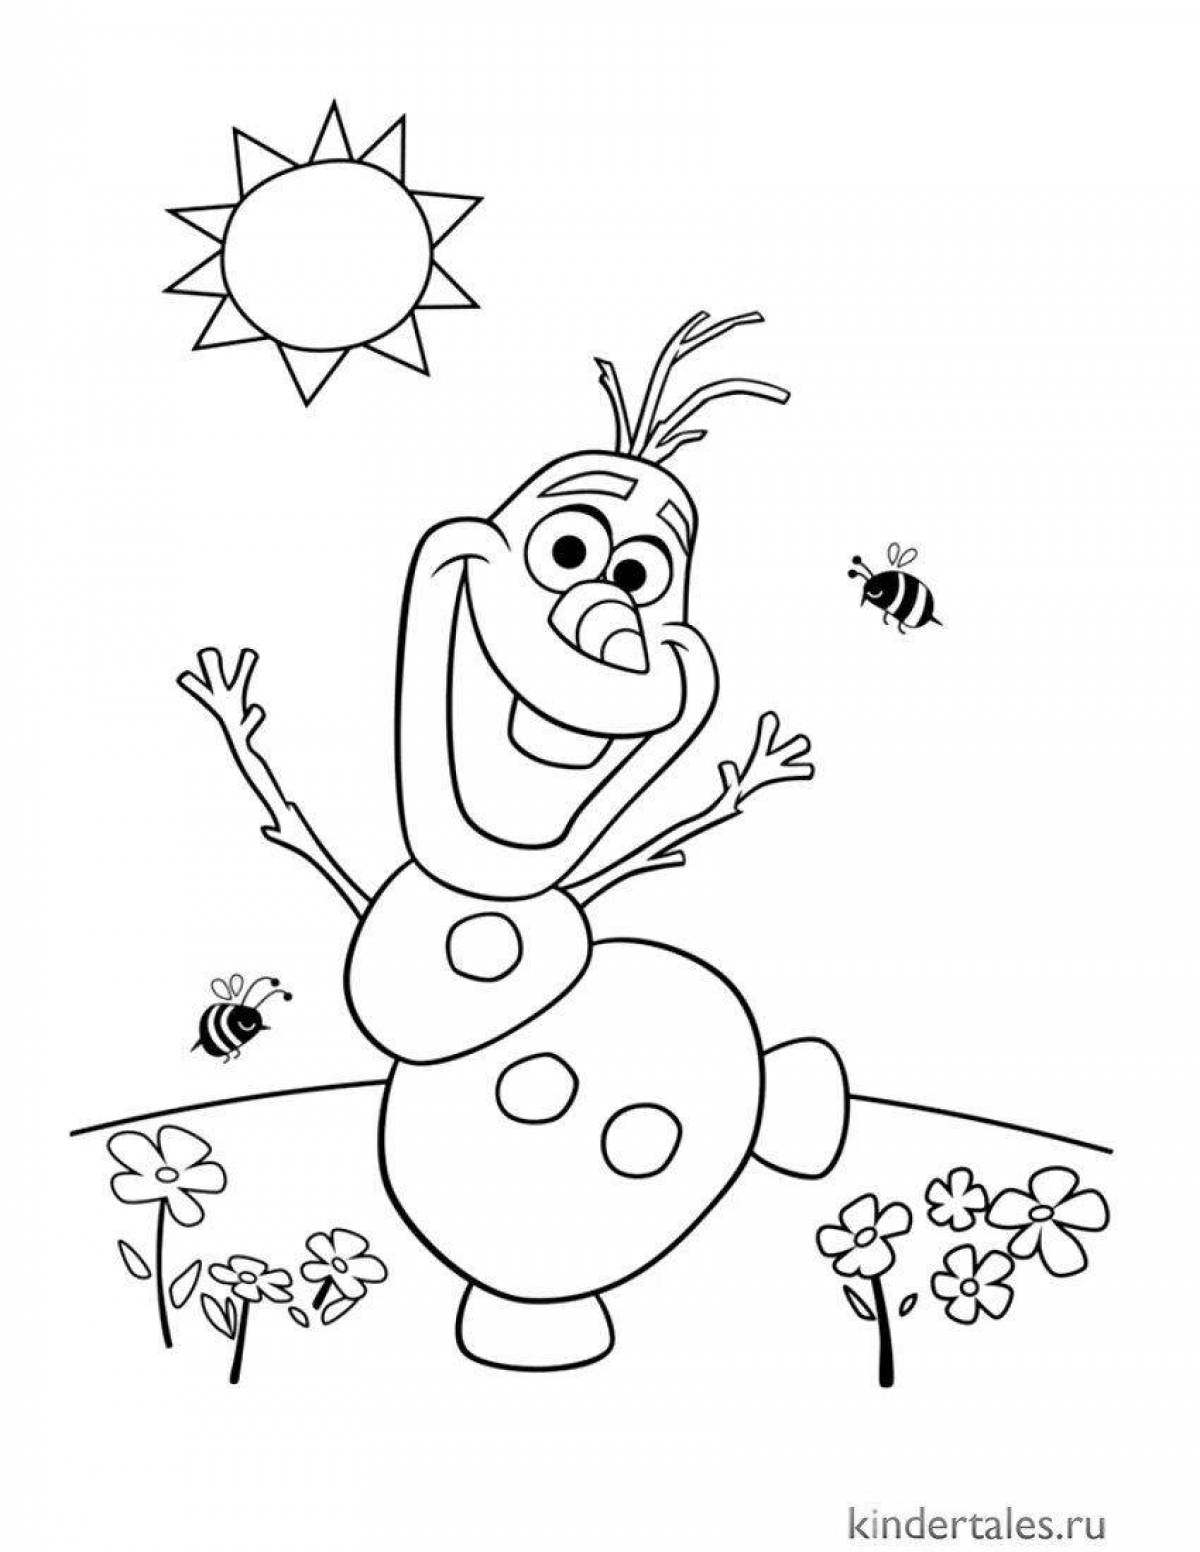 Witty snowman Olaf coloring book